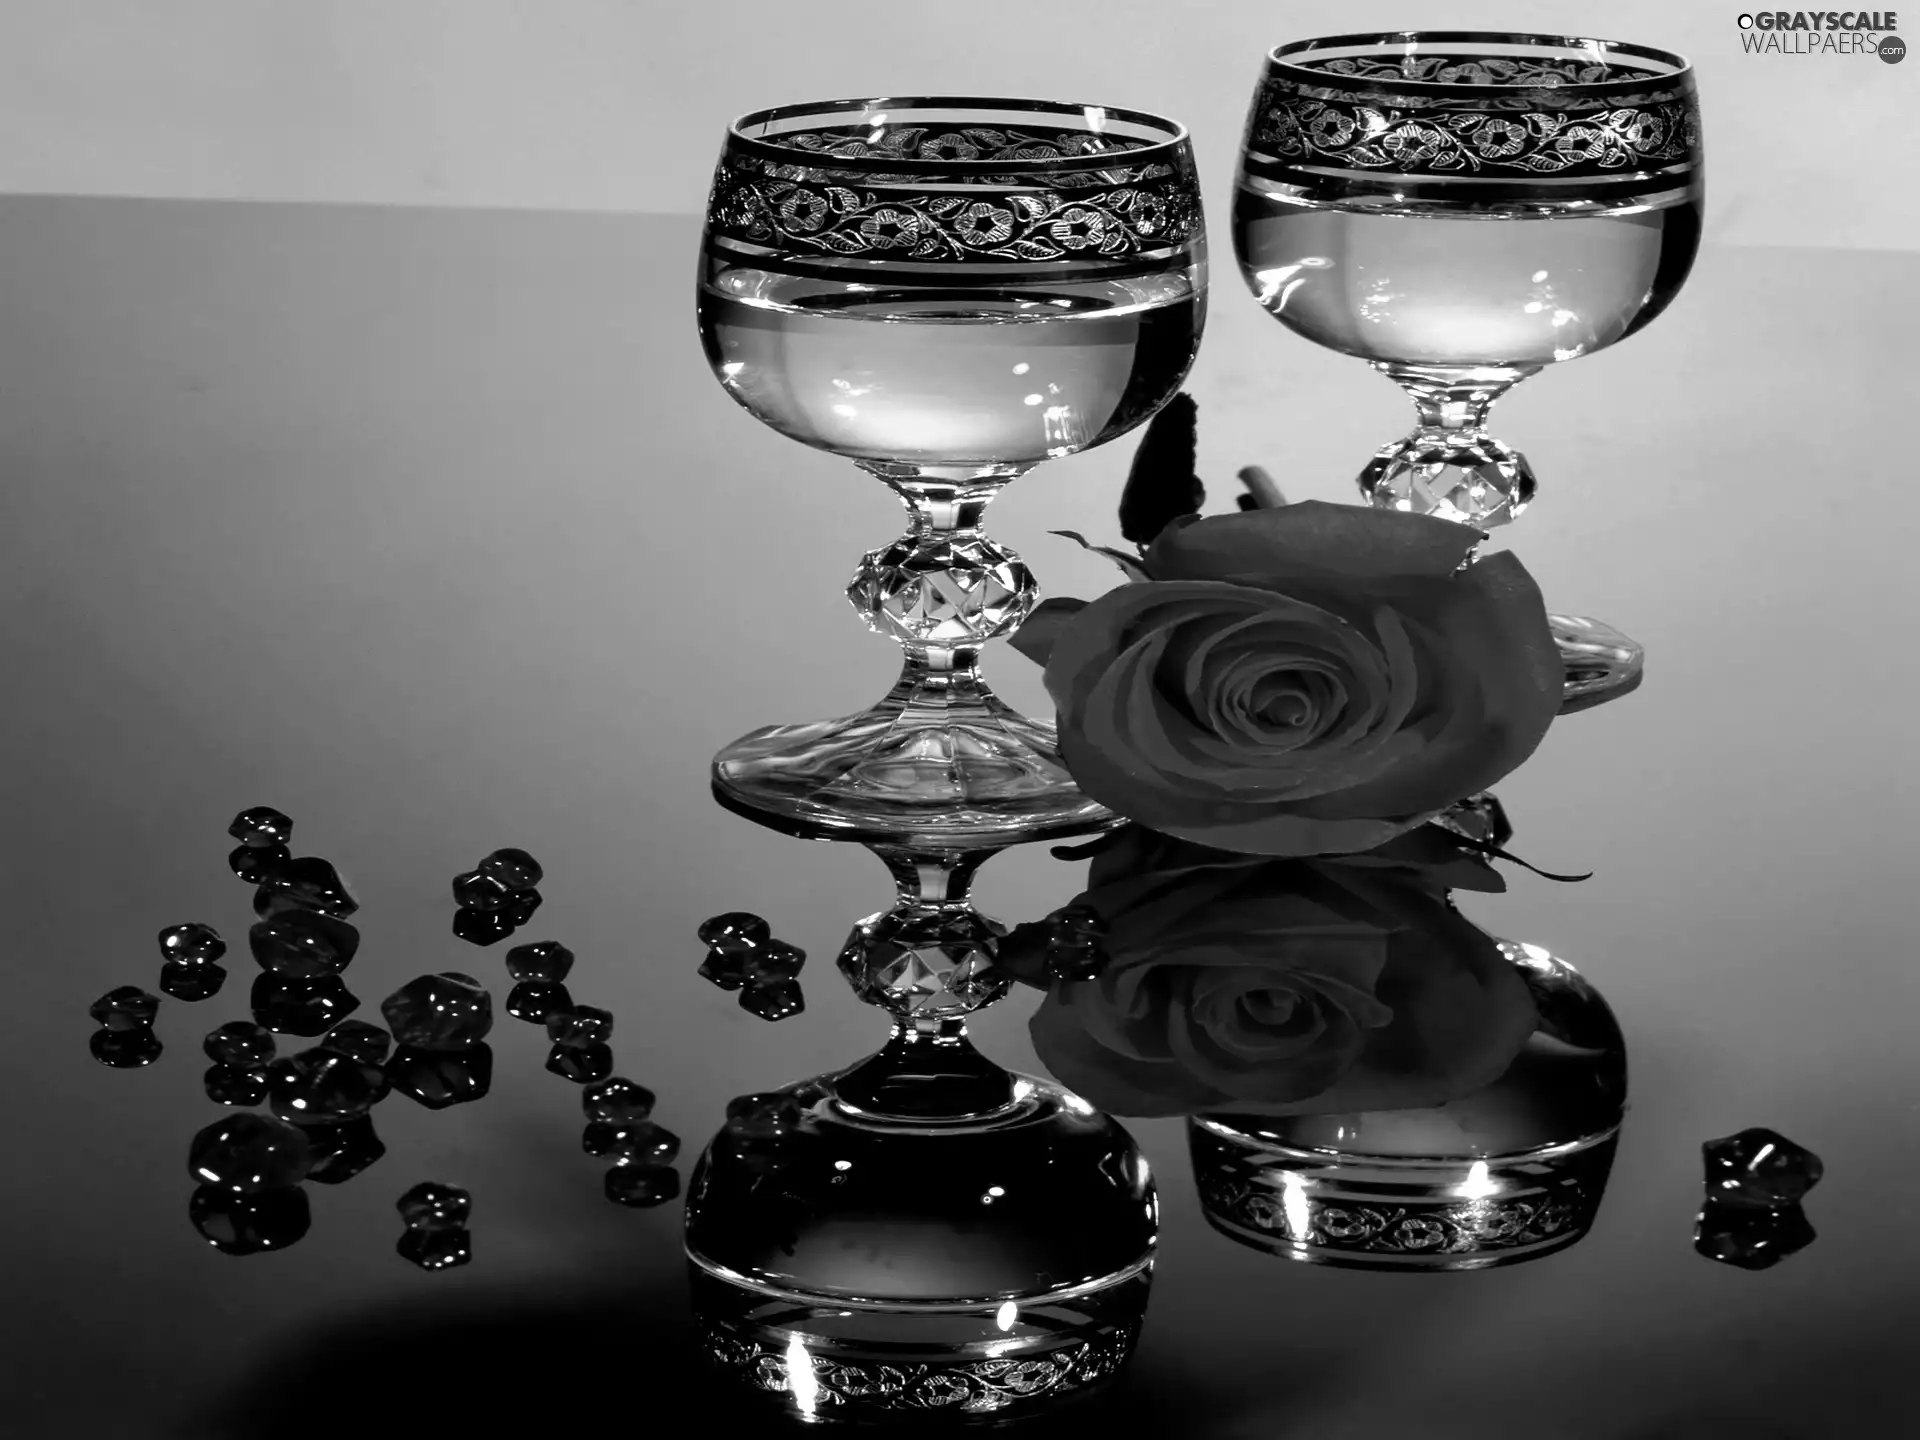 reflection, Mirror, rose, glasses, red hot